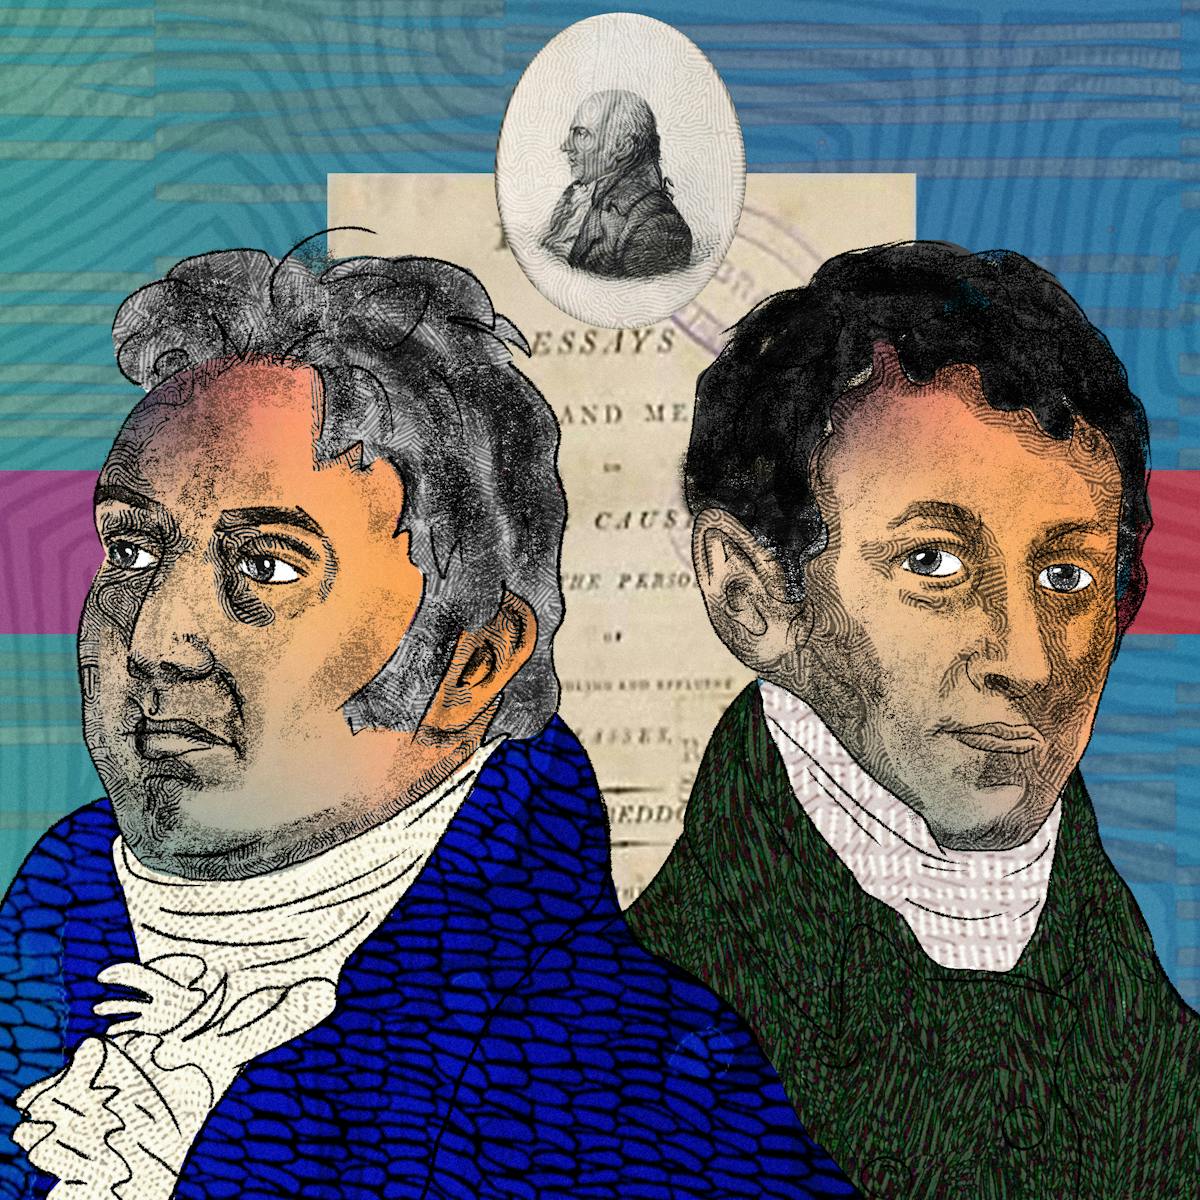 An abstract illustration featuring two head and shoulders portraits of two males posed back to back, depicting the writer philosopher Samuel Taylor Coleridge on the left and chemist Humphry Davy on the right. On the left side by Coleridge there is a romantic image of a red poppy flower as well as an opium pipe. To the right side by Davy there is an archive image of someone inhaling pain relief gas as part of a medical procedure. 